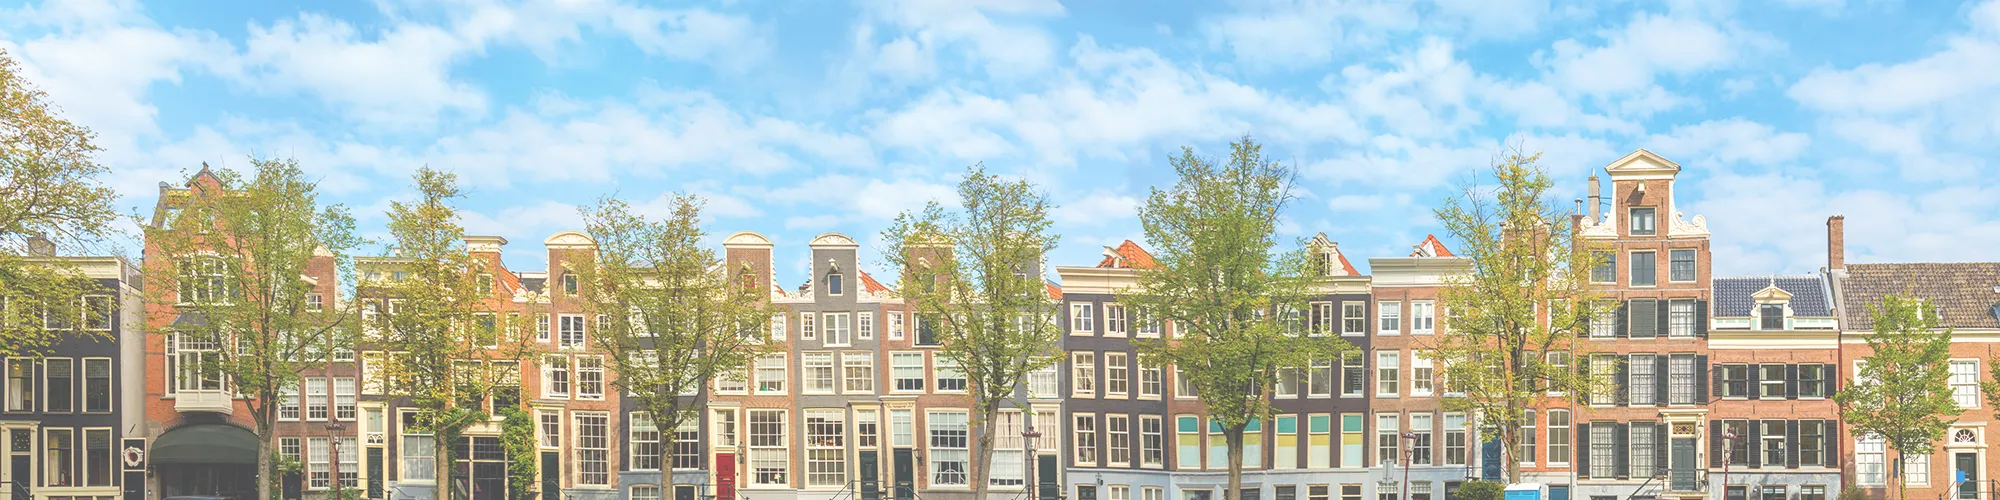 background image of row houses and blue sky- find a notary